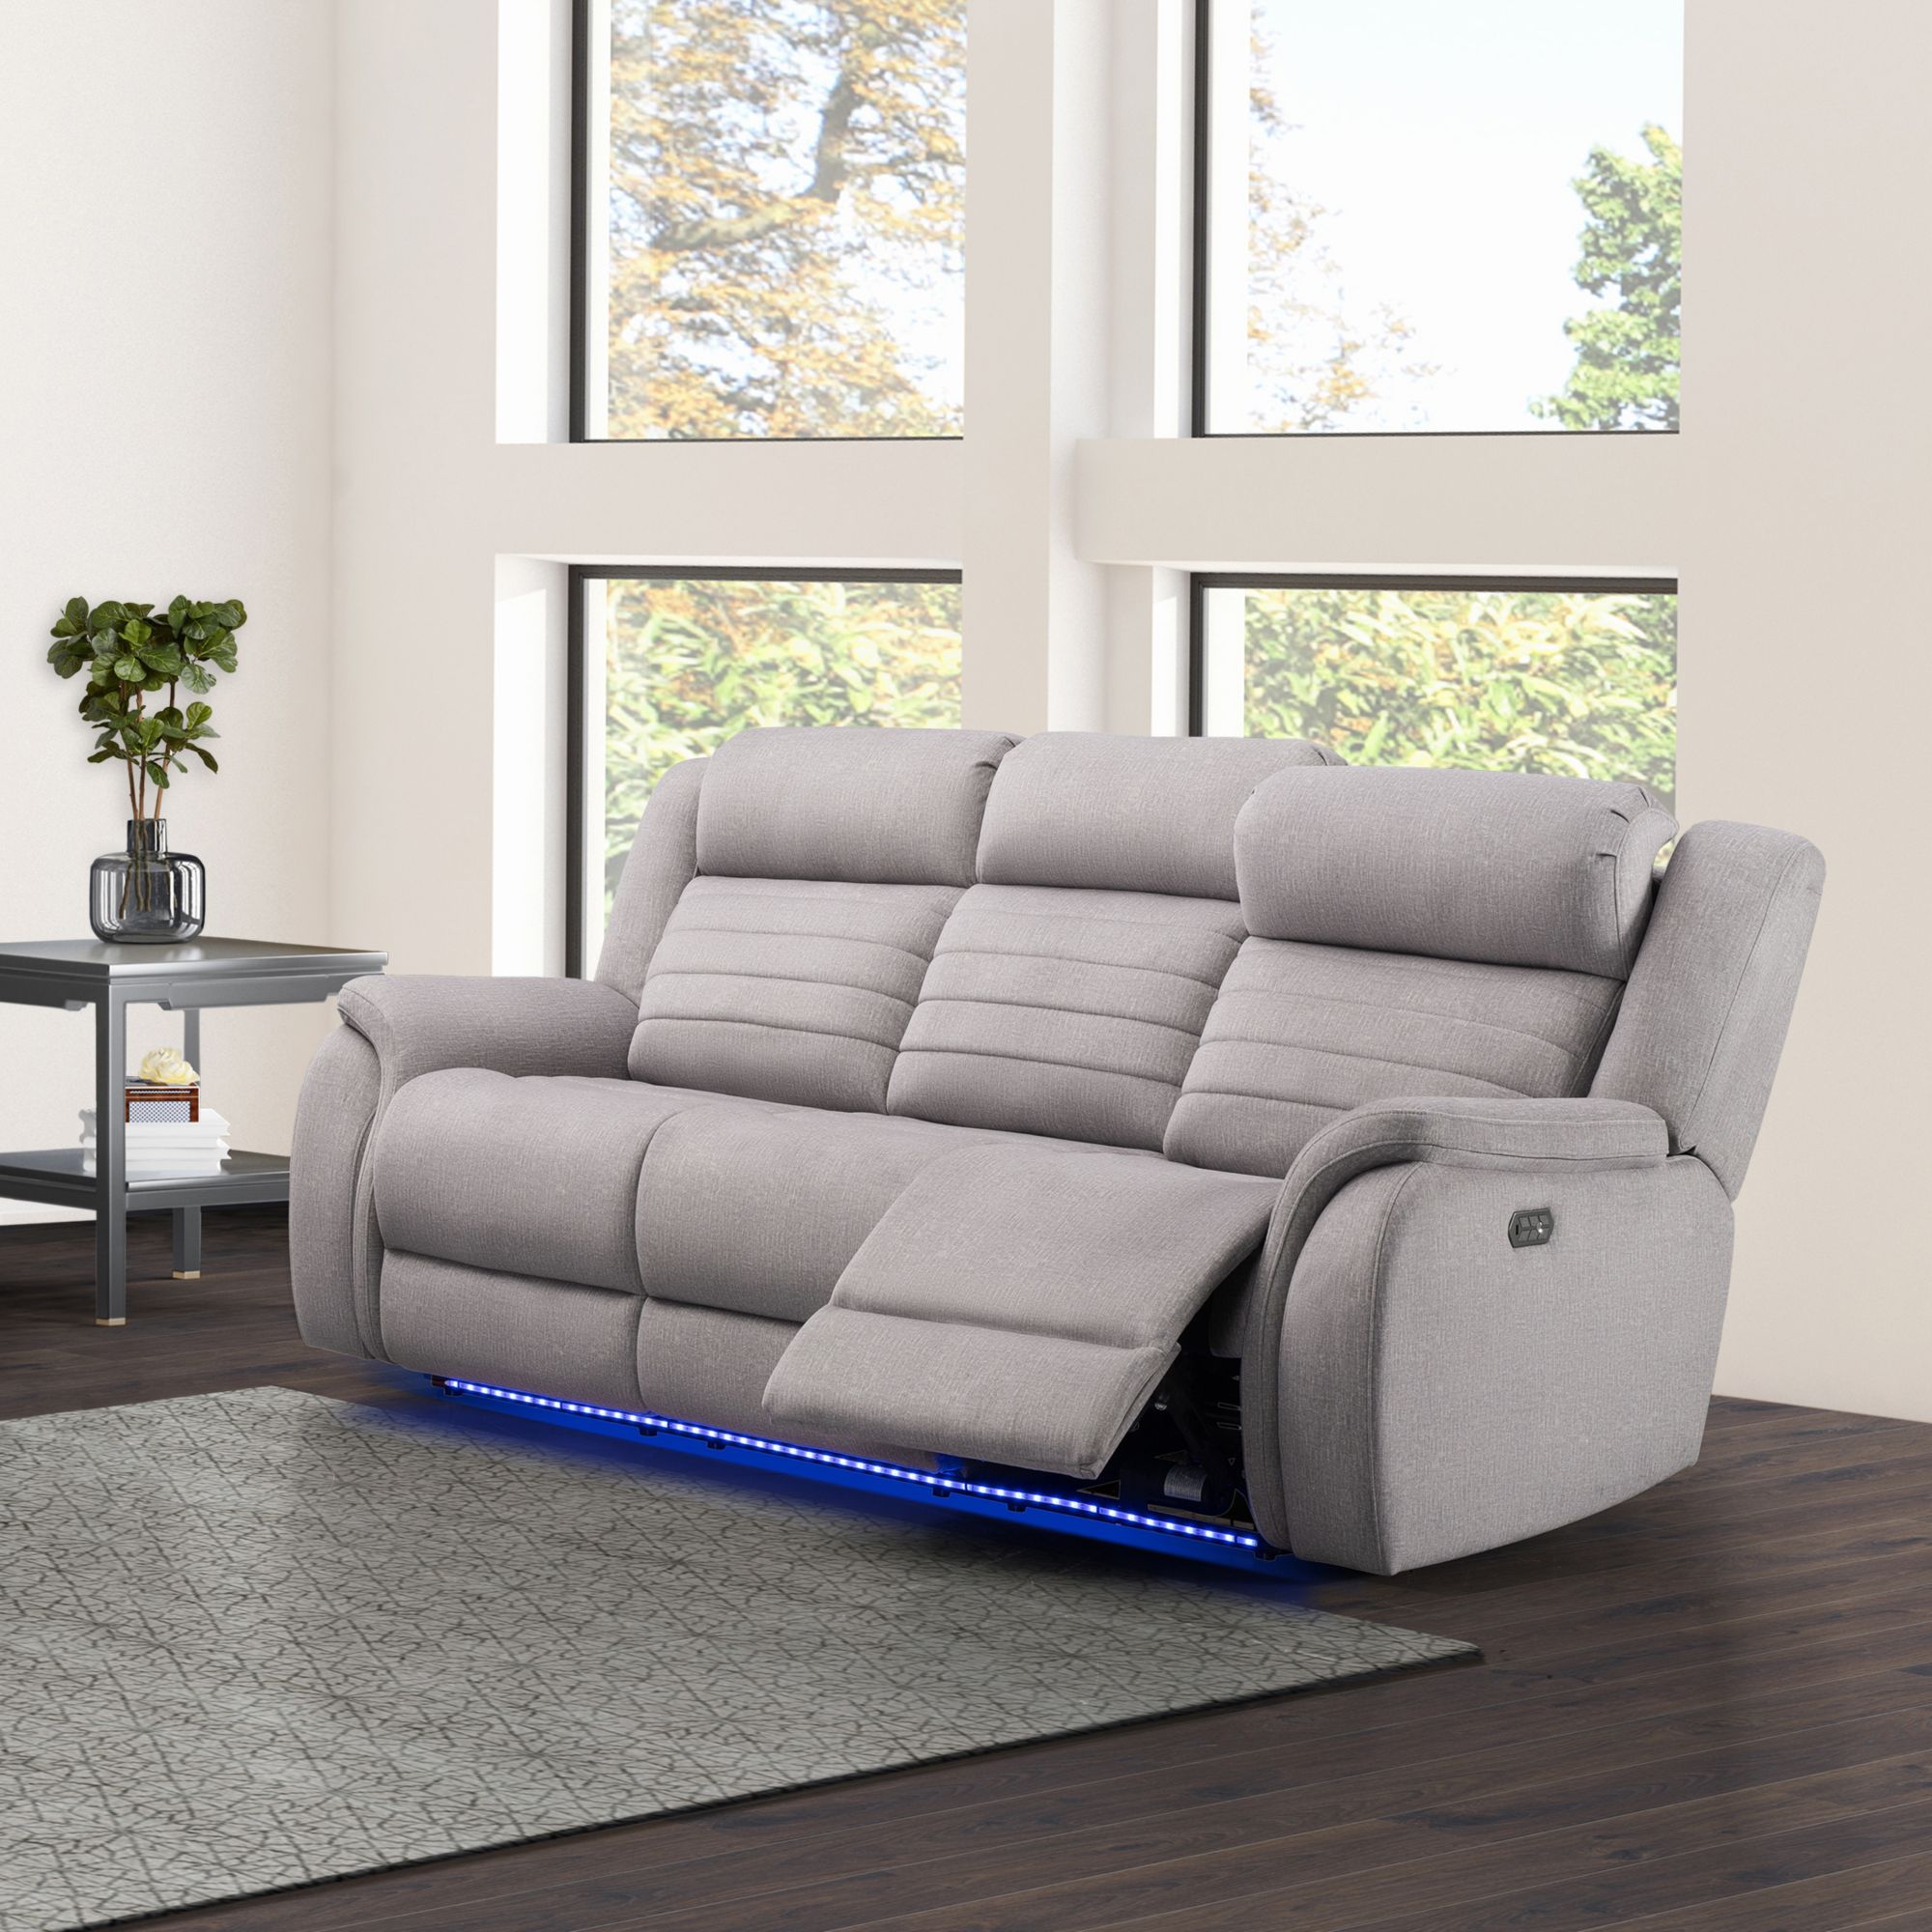 Gift relaxation and comfort with the Heated Reclining & Folding